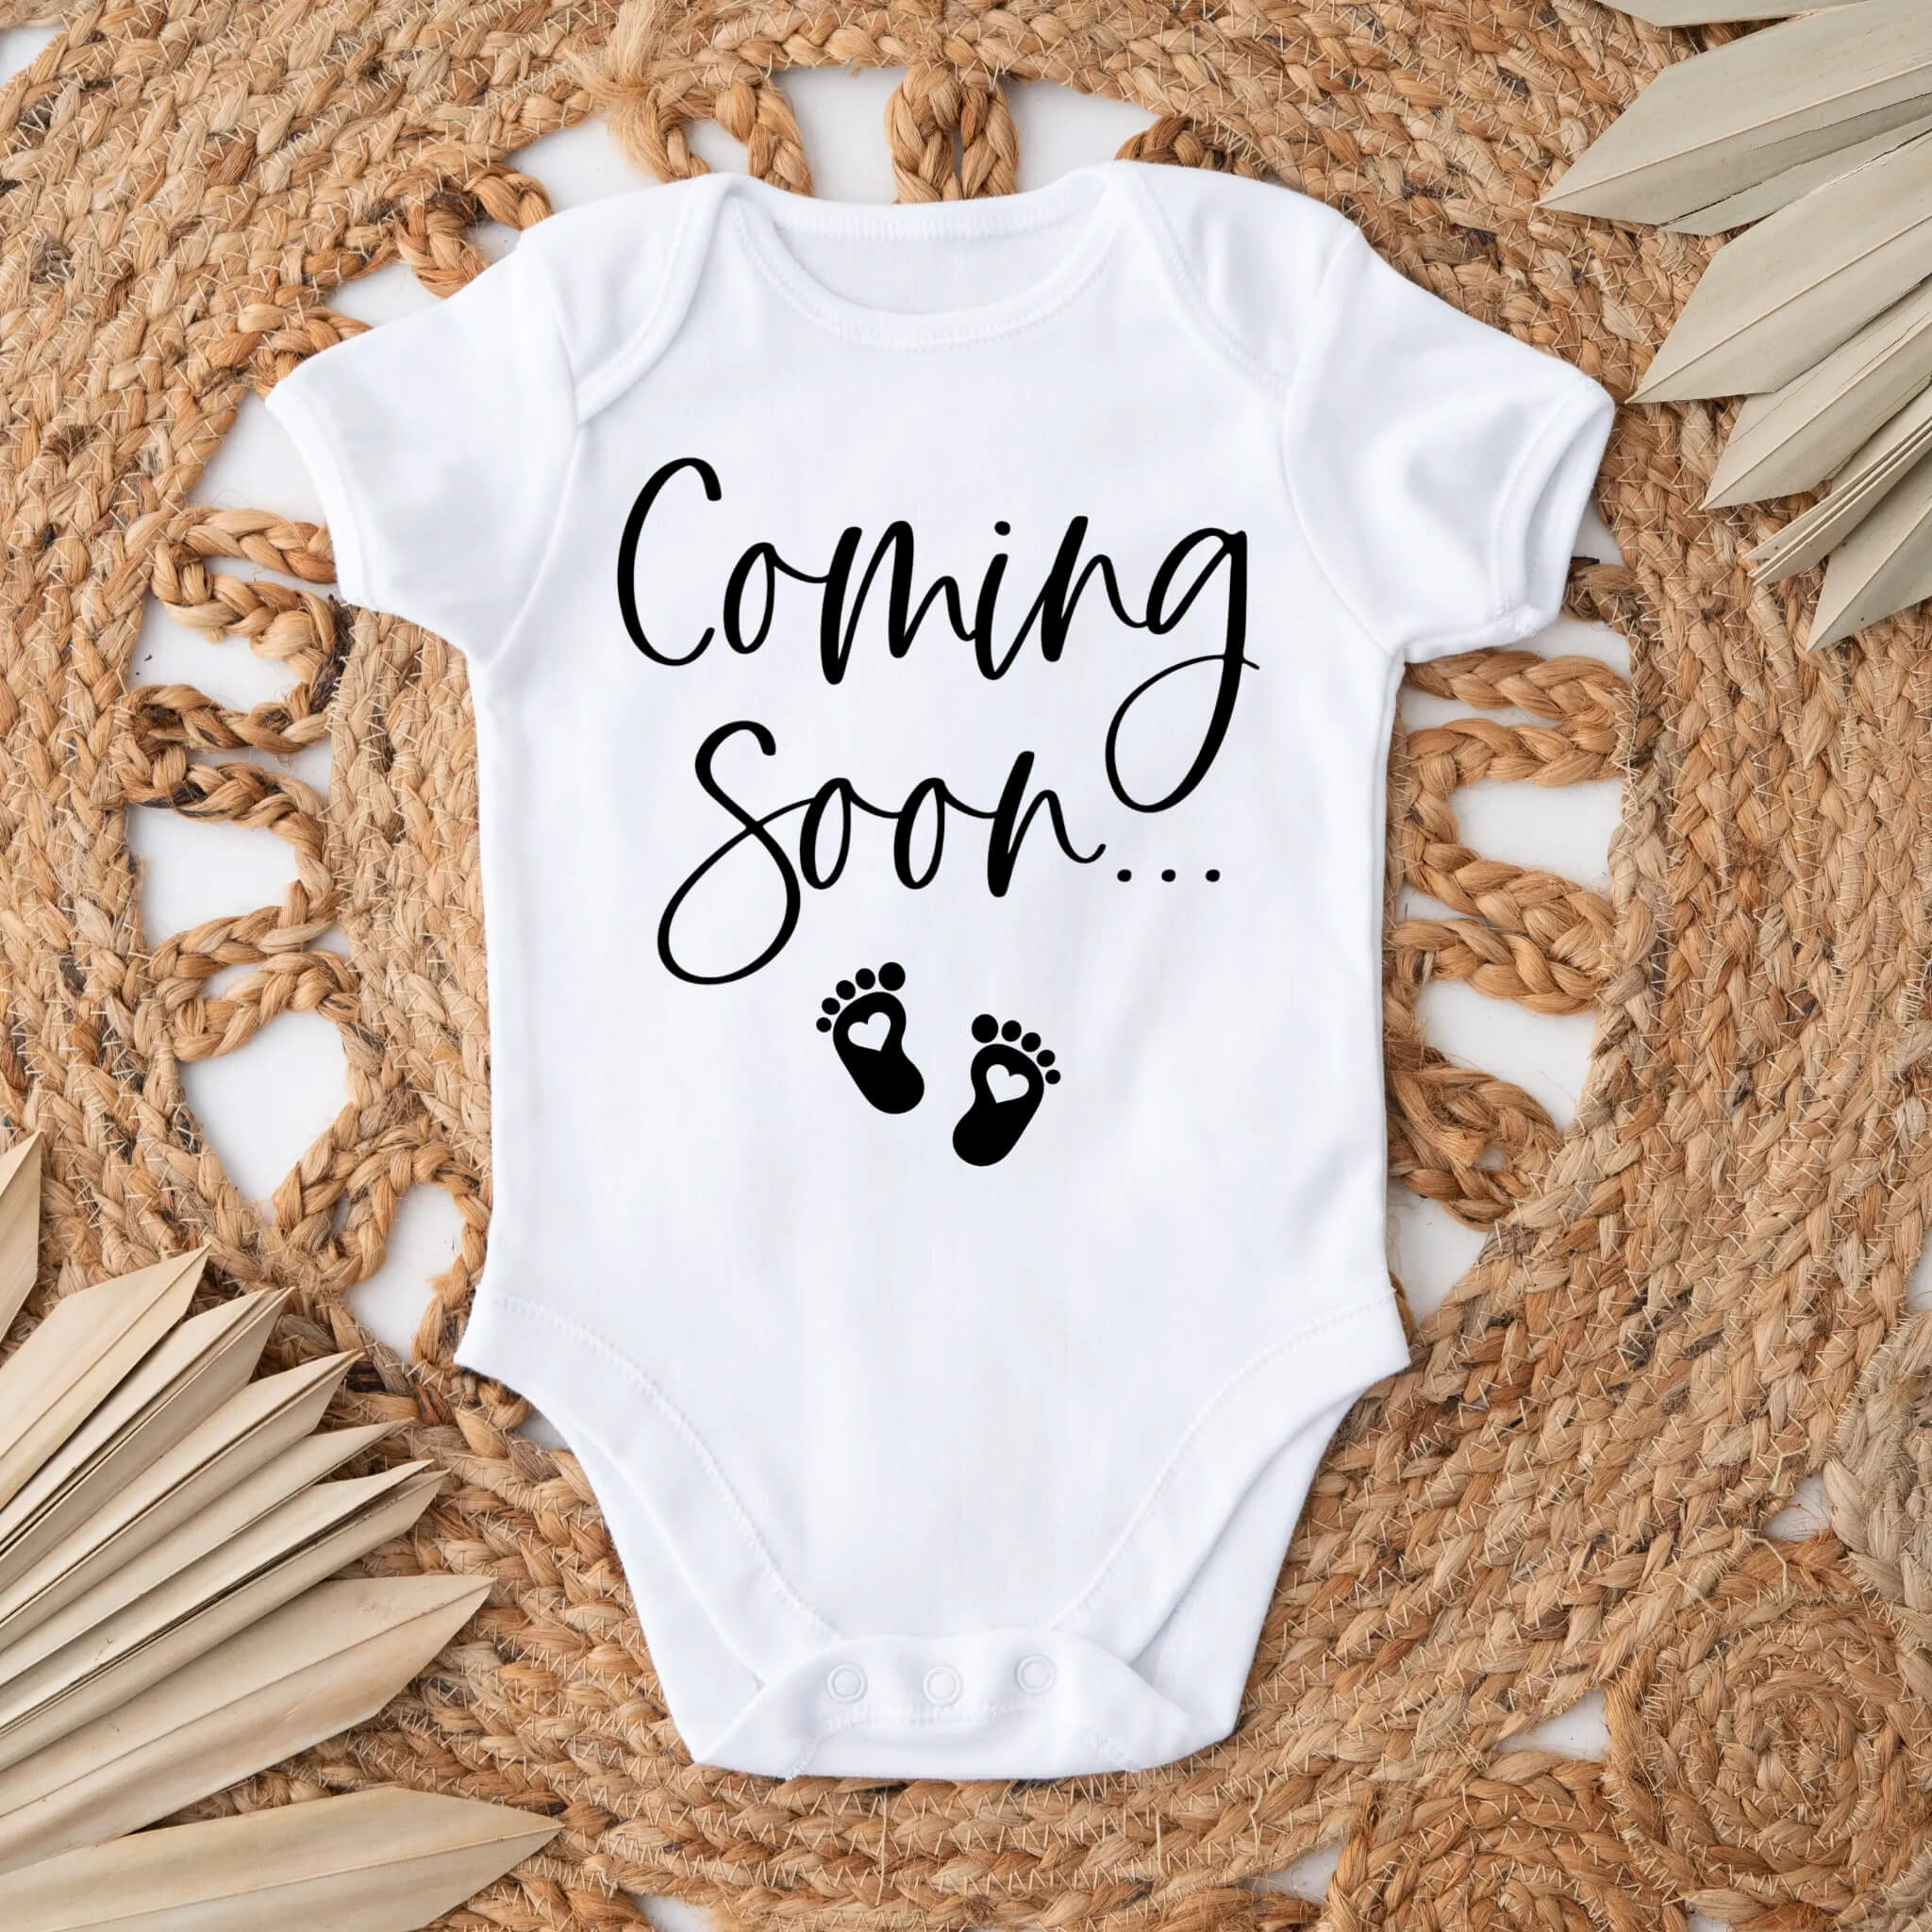 Personalized Pregnancy Announcement, Coming Soon, Dad, Grandma, Grandpa, Auntie, Uncle To Be, Cute Customized Baby Announcement Onesie Gift Box, Personalized Pregnancy Due Date Onesie Gift Box